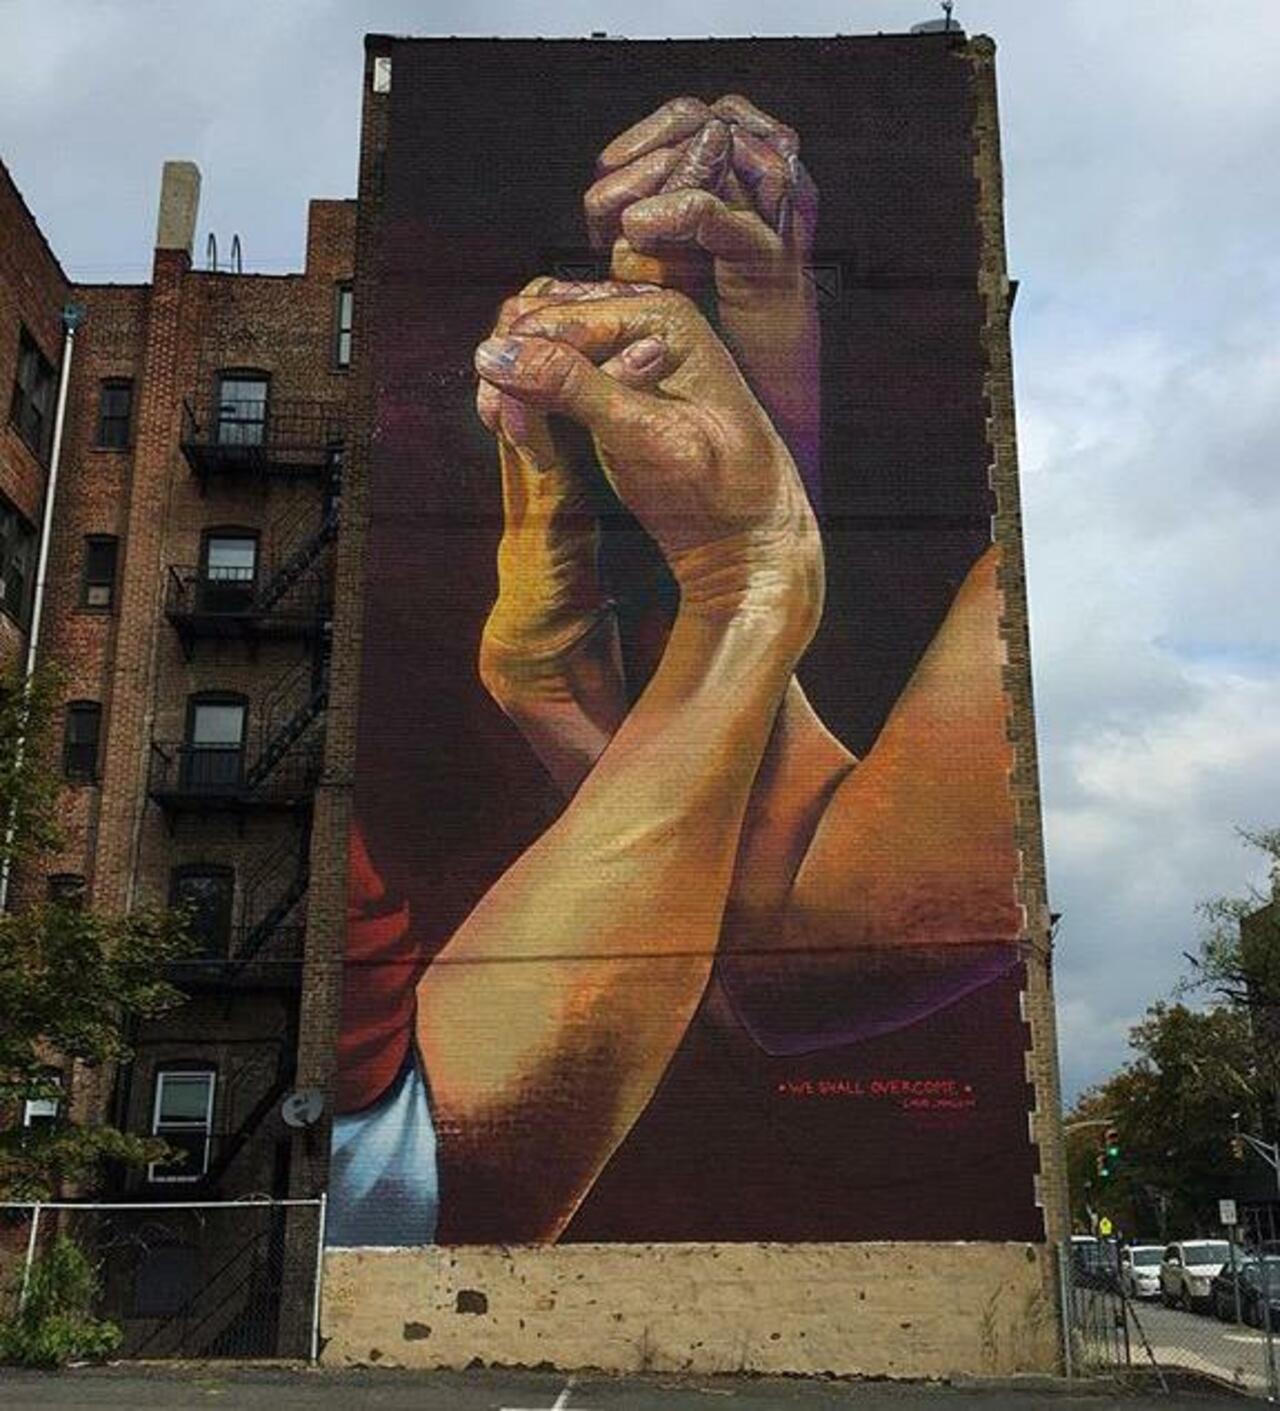 New Street Art by CaseMaclaim in Jersey City for the TheBKcollective 

#art #graffiti #mural #streetart http://t.co/sM0upExvs1